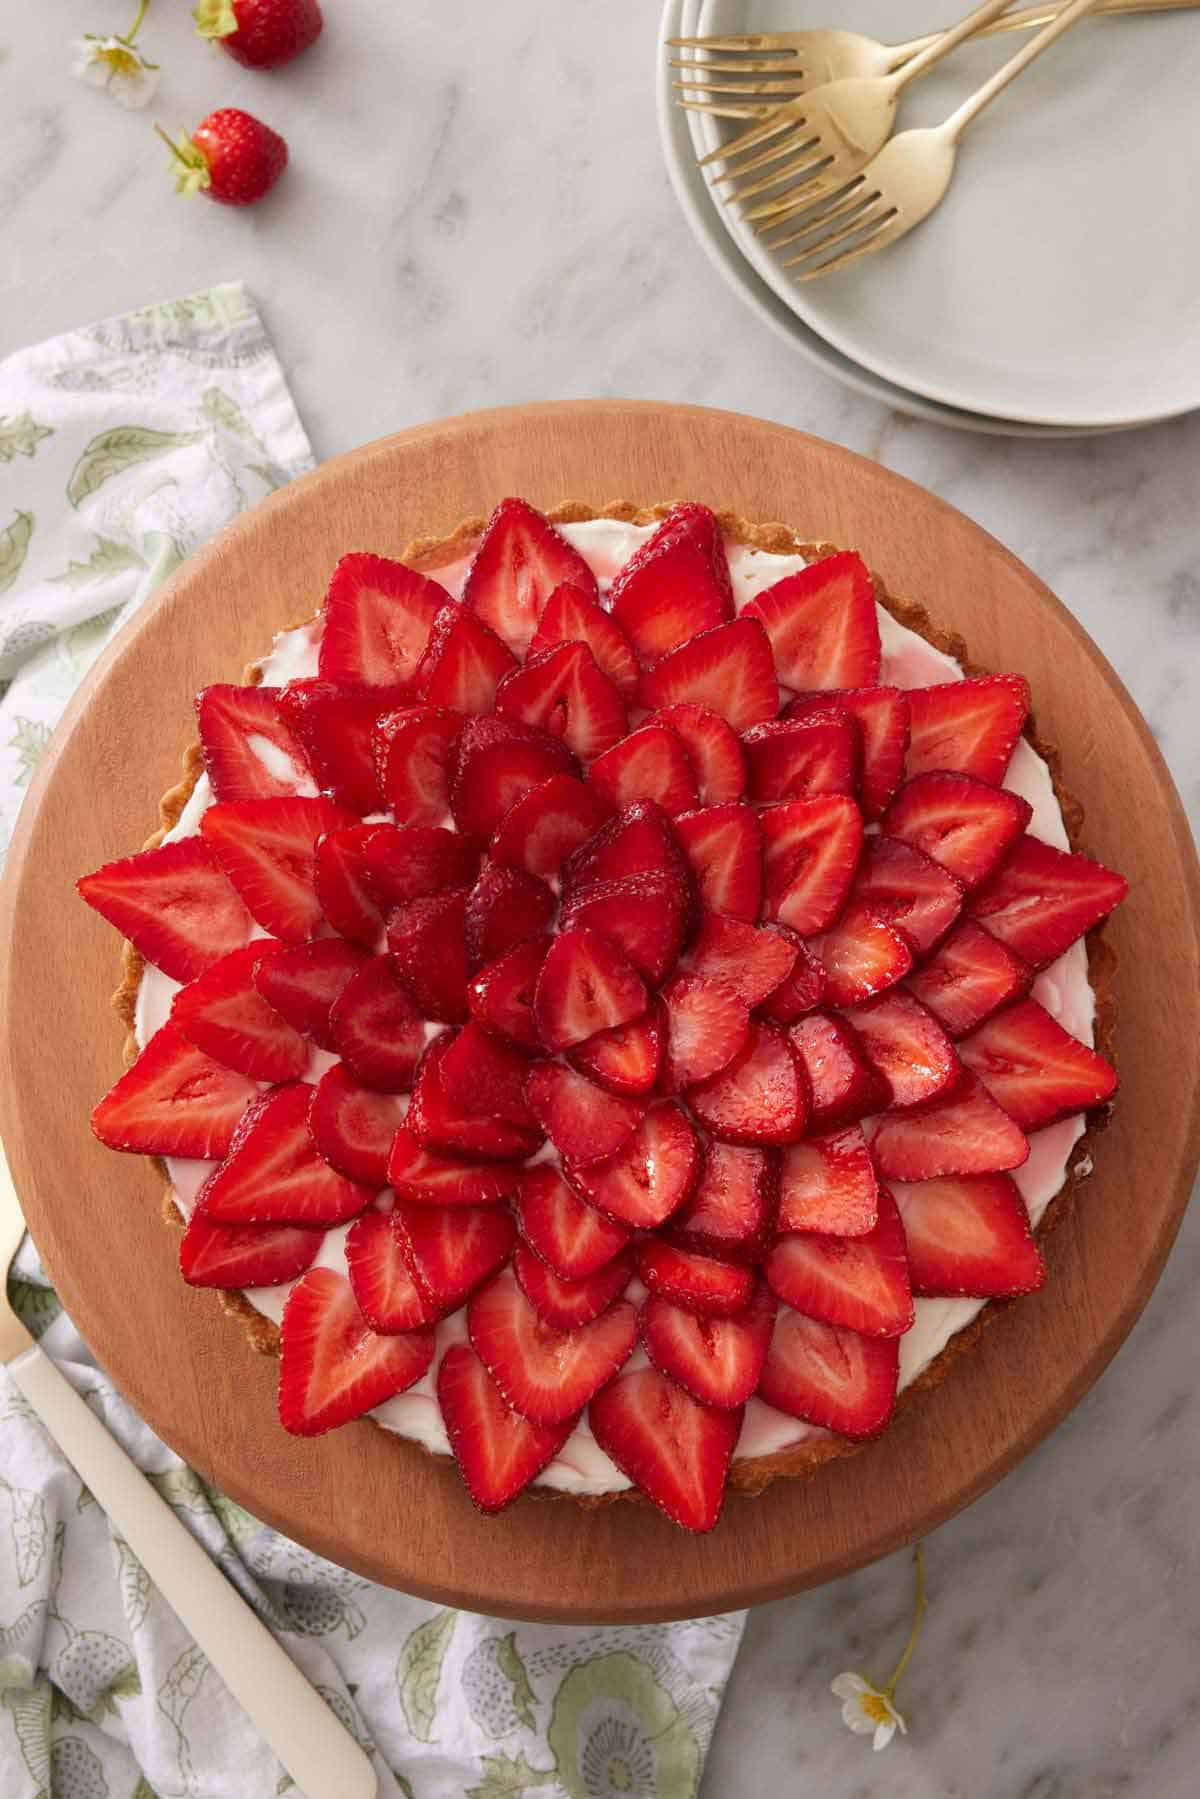 Overhead view of a strawberry tart with a stack of plates and forks to the side.